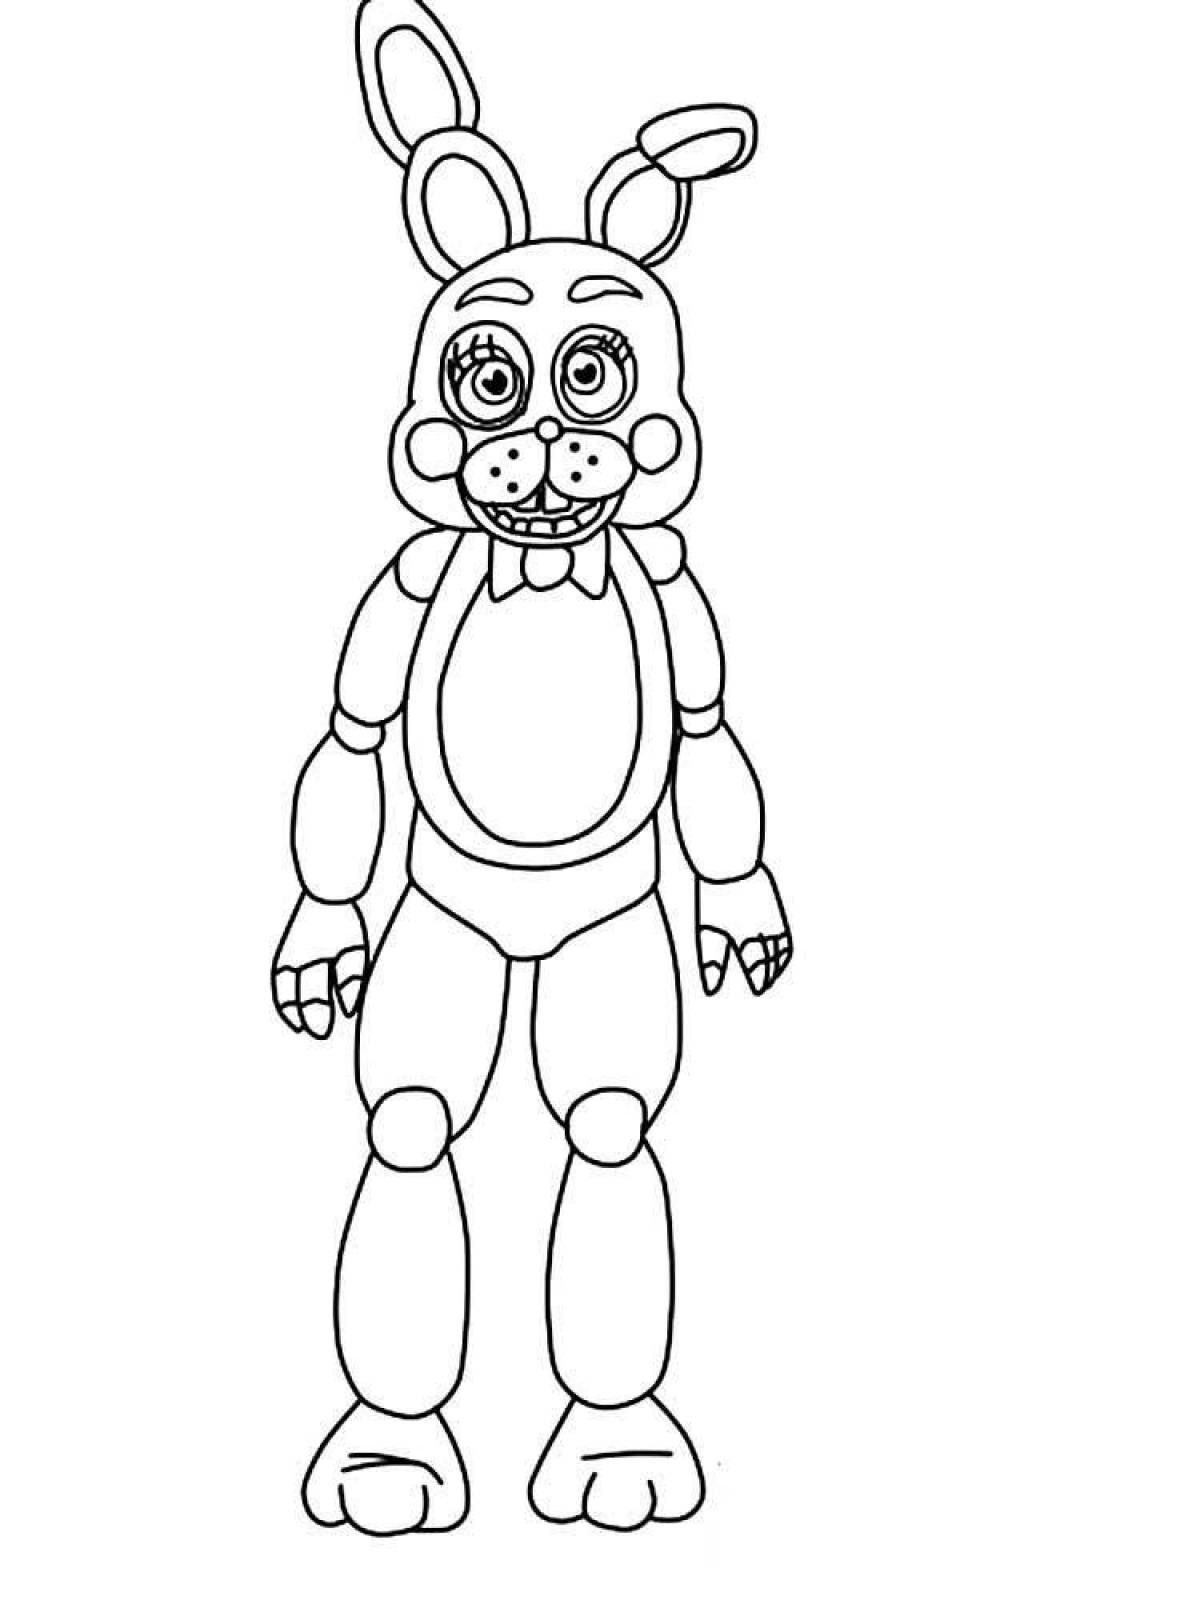 Colorful animatronics coloring page for the little ones